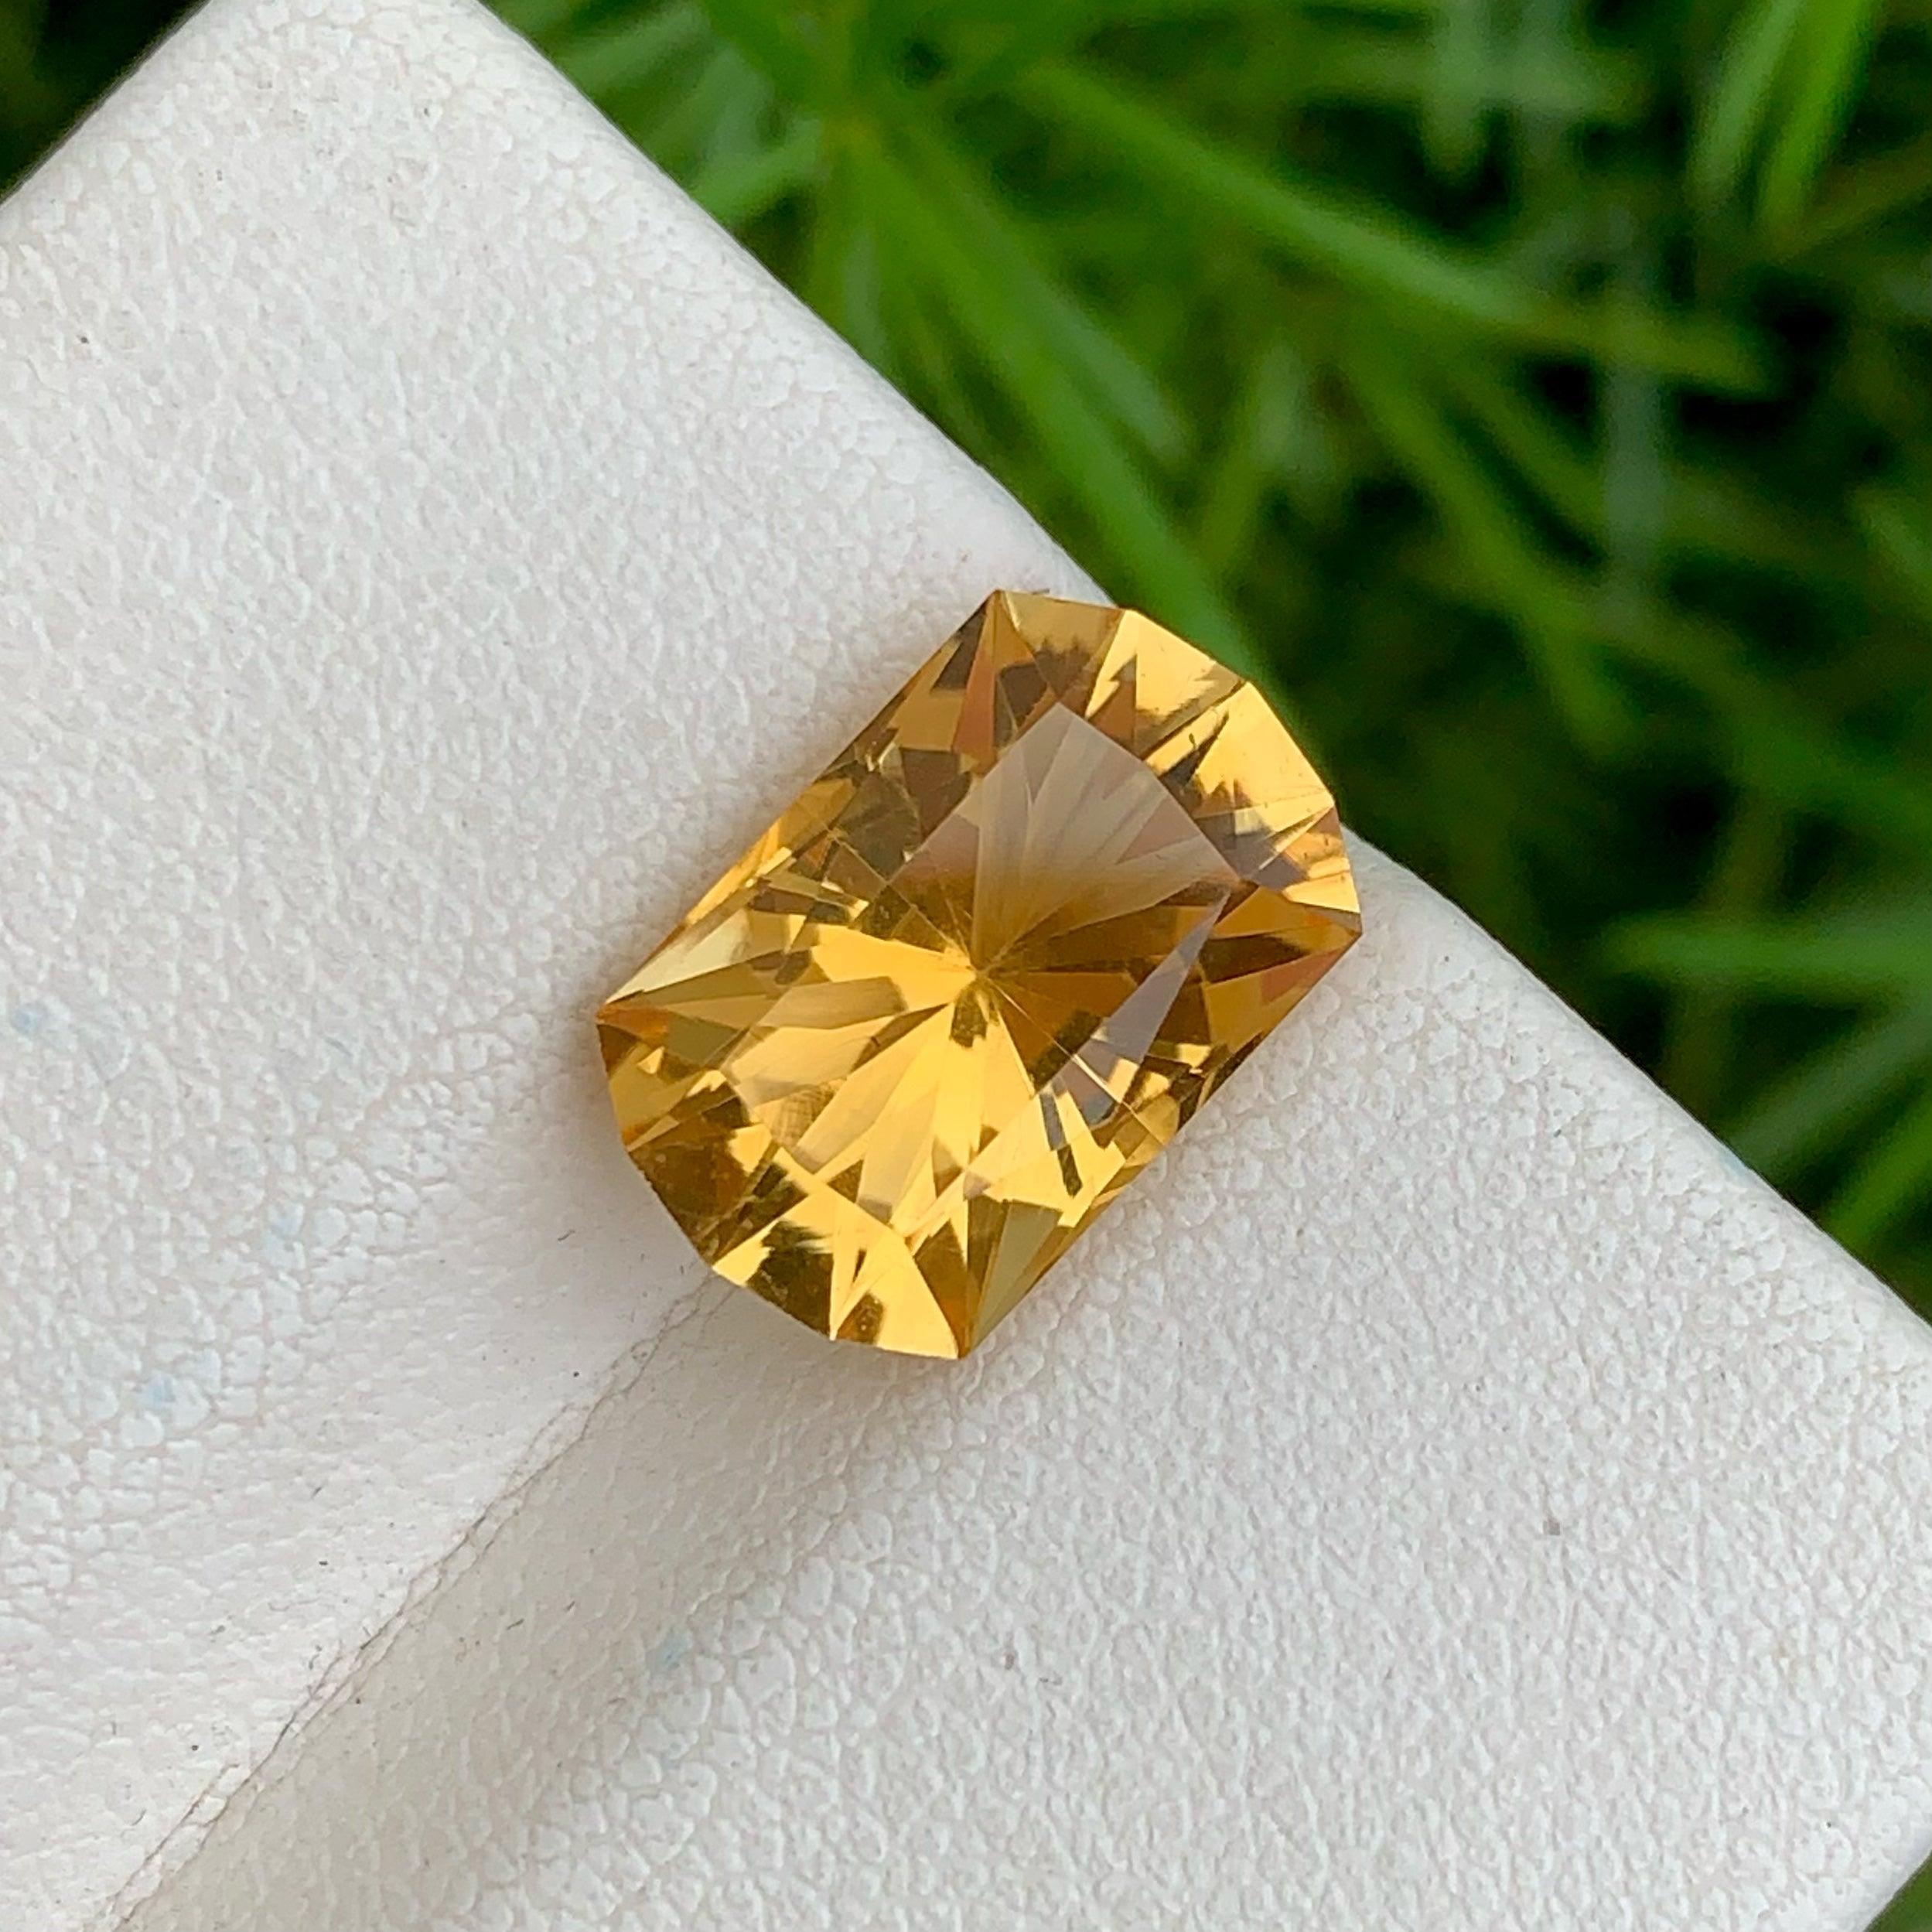 is yellow topaz the same as citrine